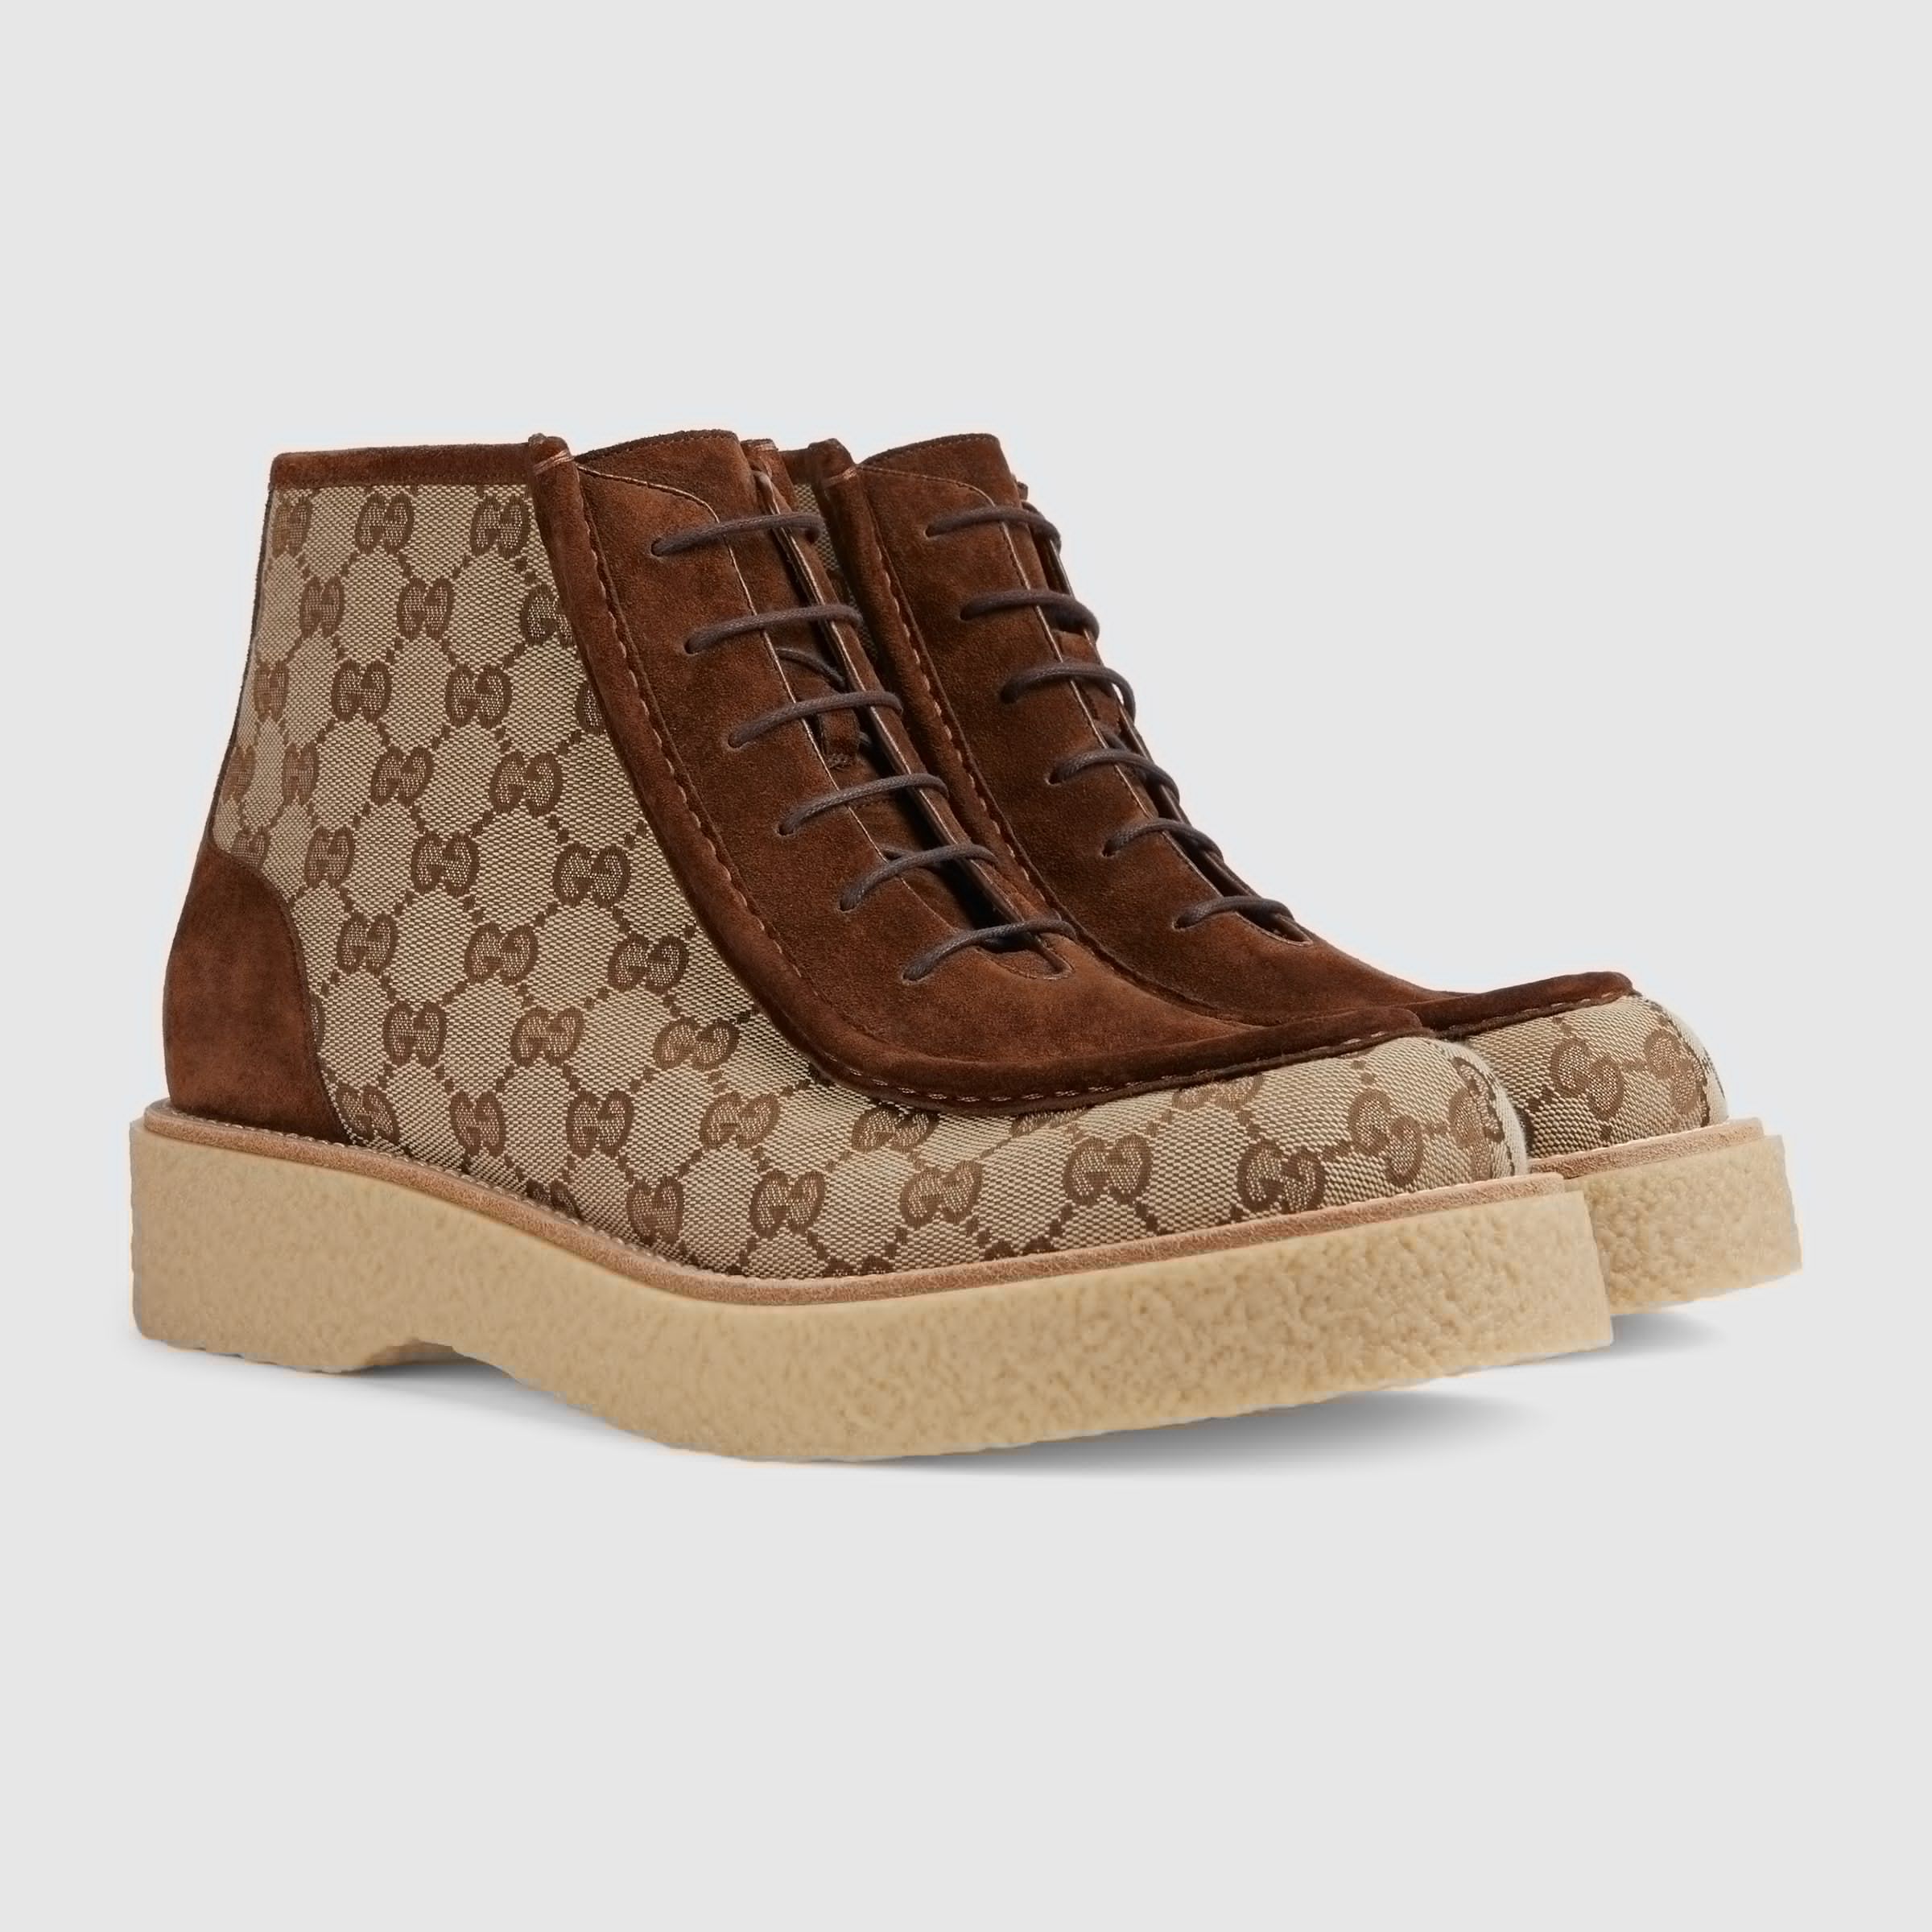 Gucci Men's lace-up ankle boot